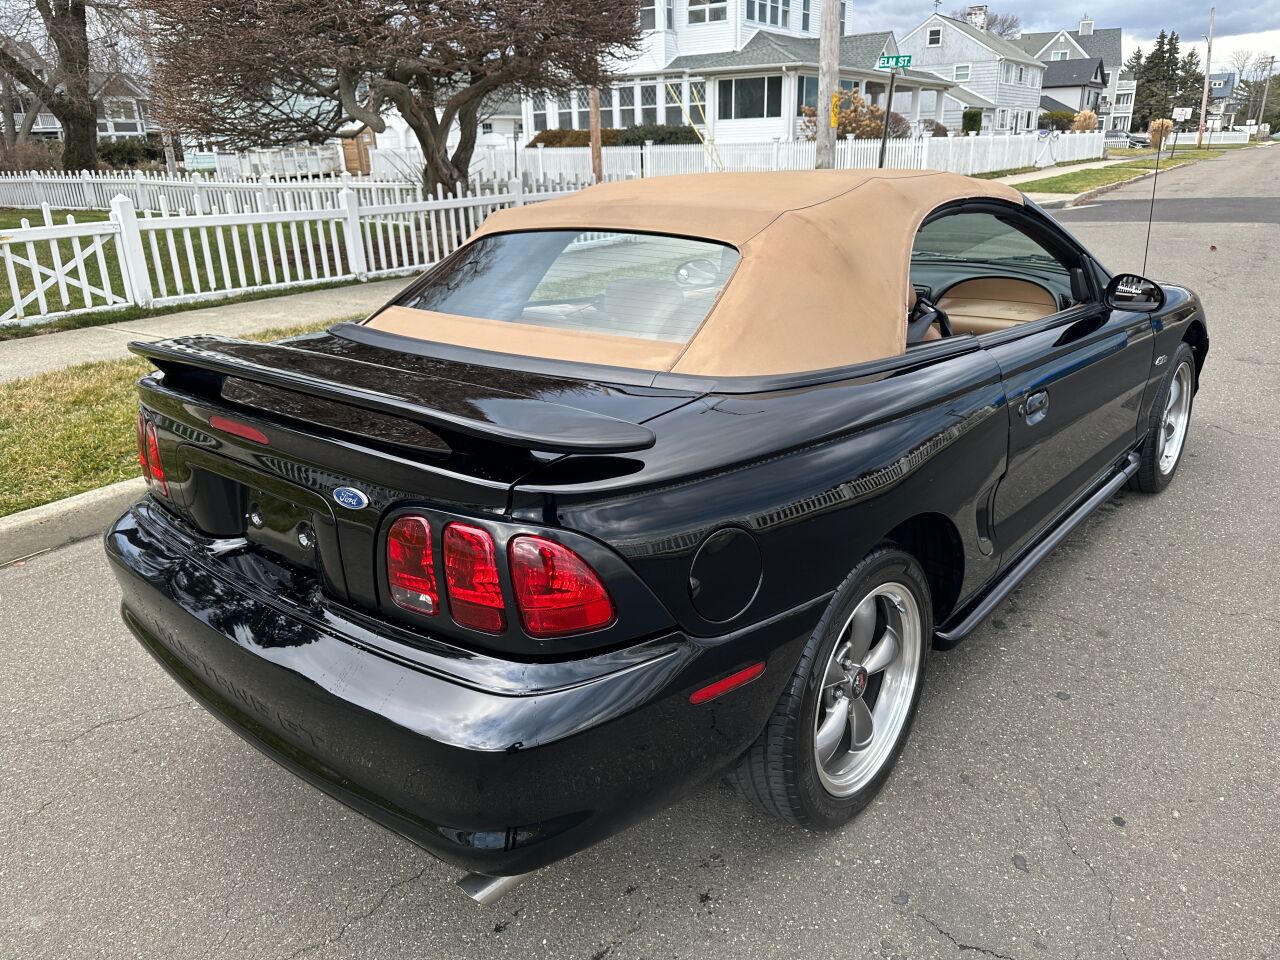 1998 Ford Mustang 16